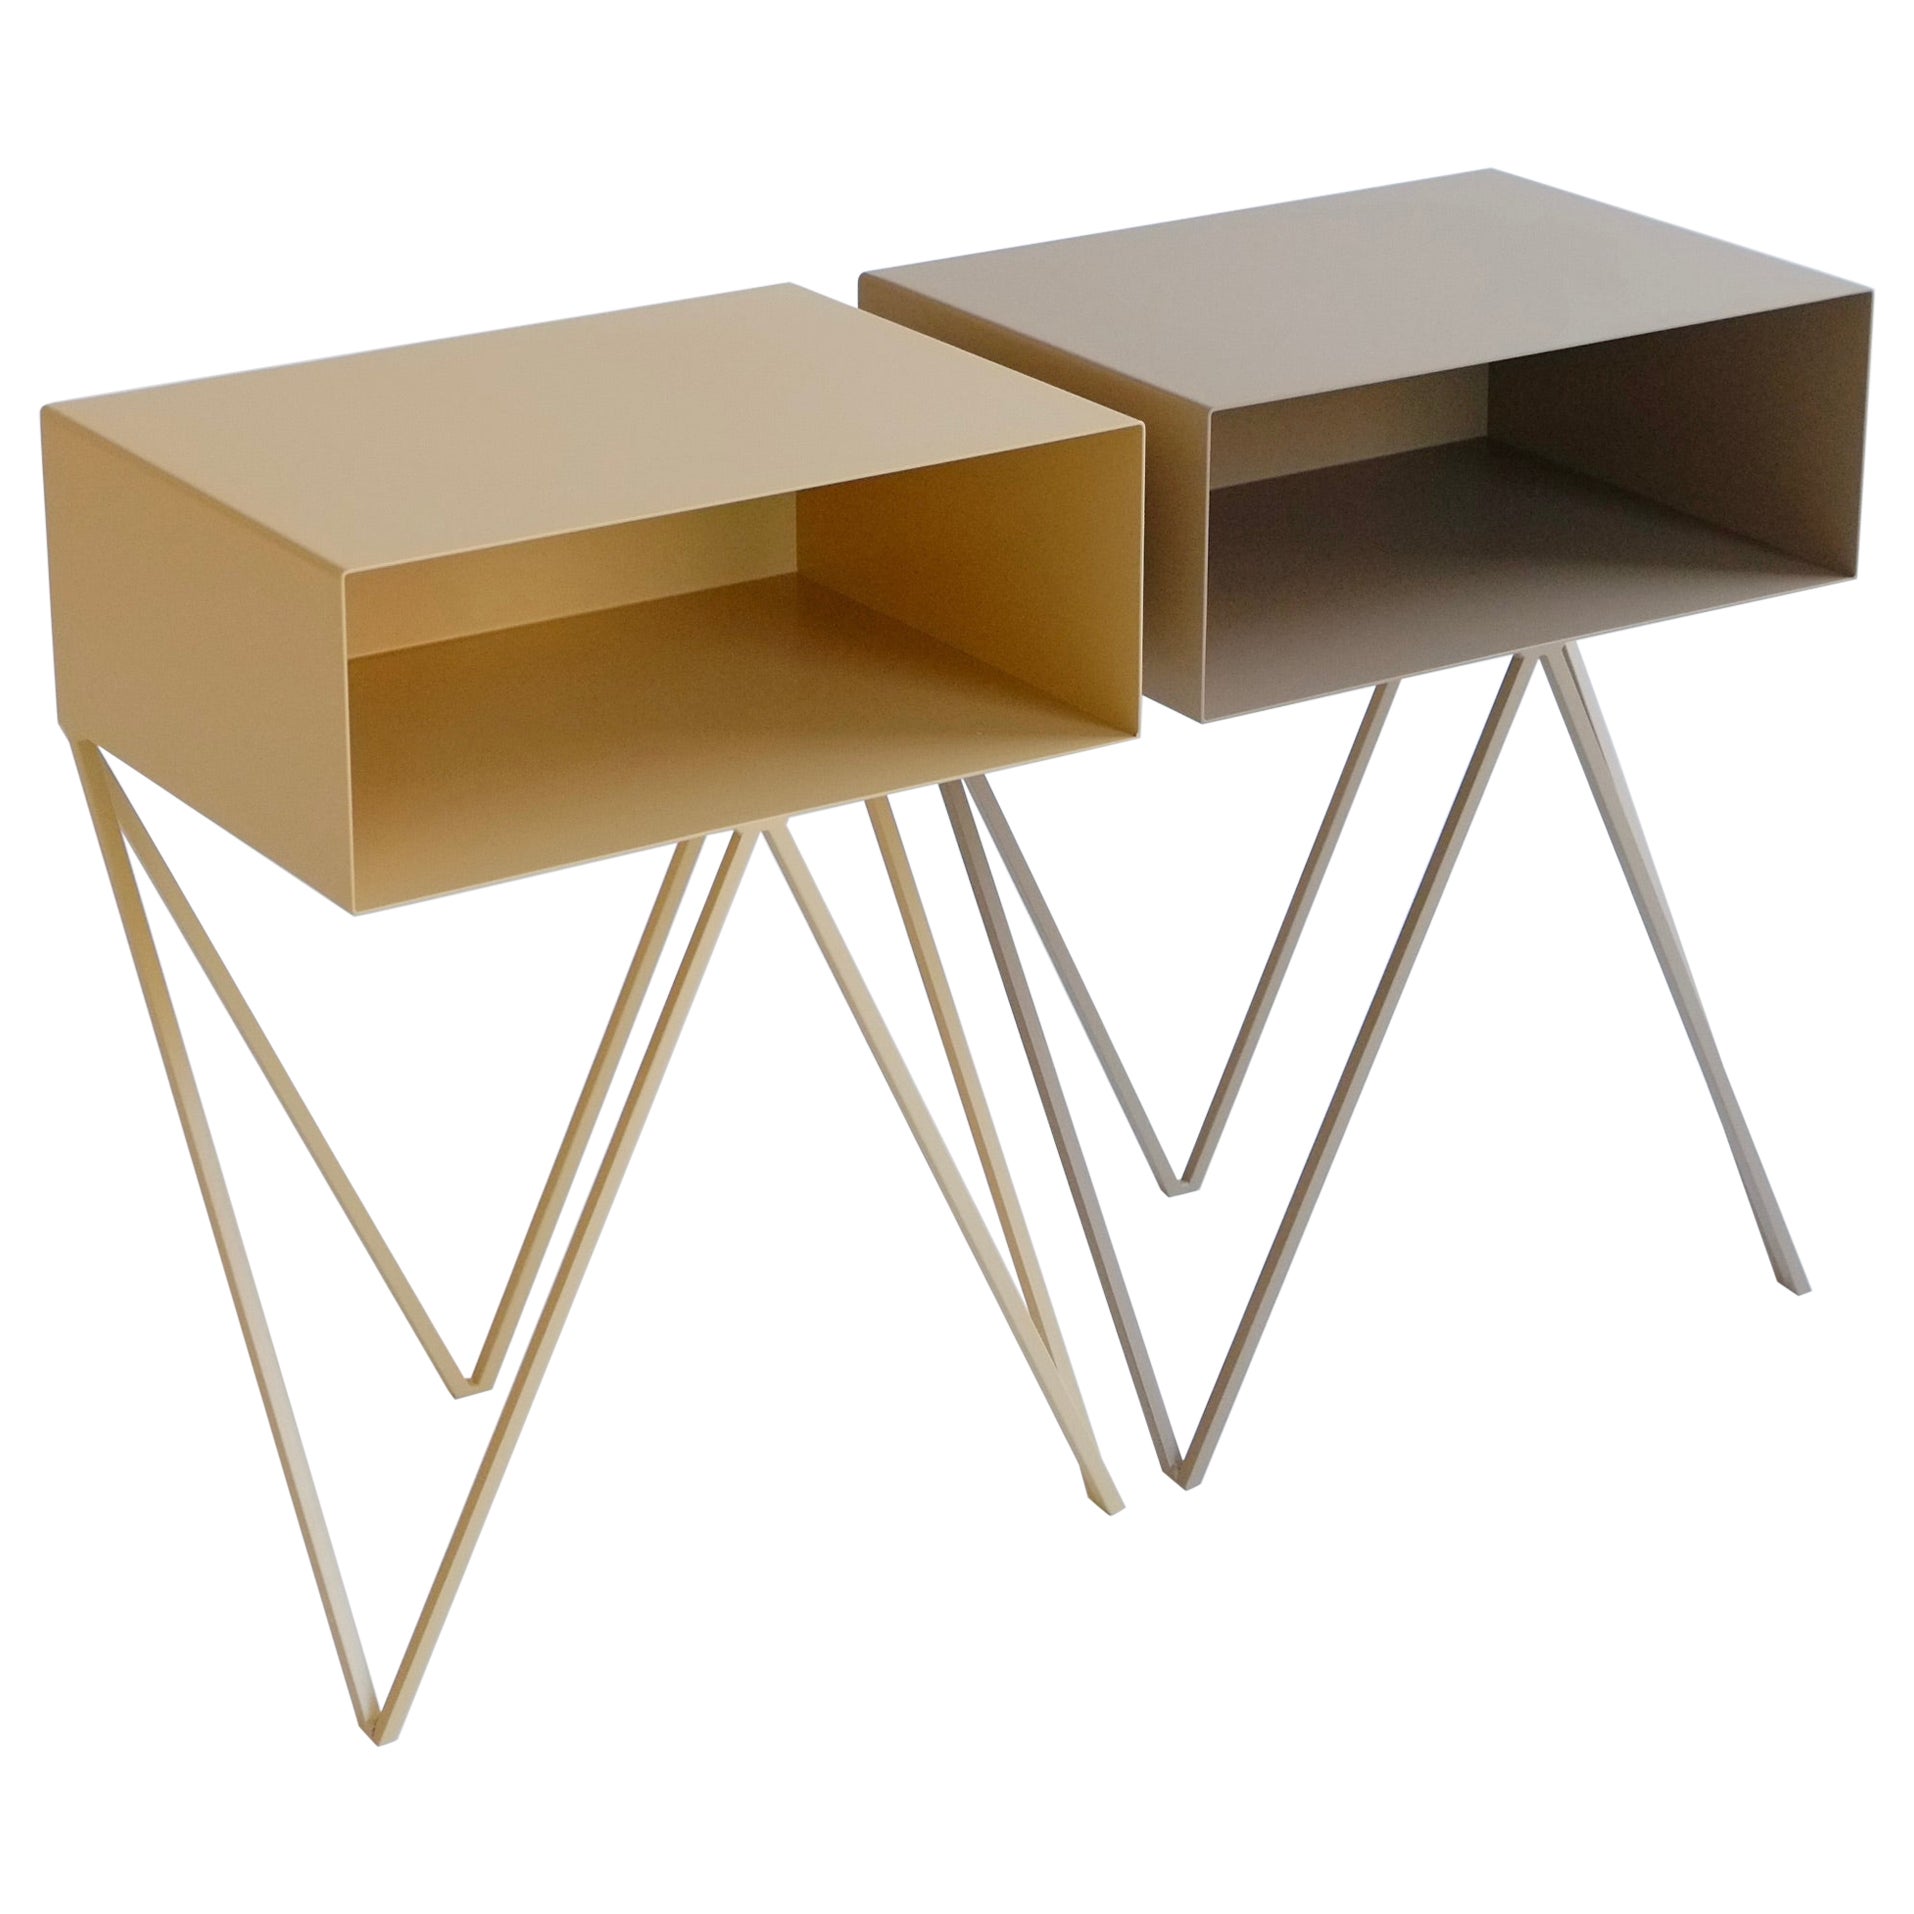 Pair of Mismatched Butternut and Coco Robot Bedside Tables - Nightstands